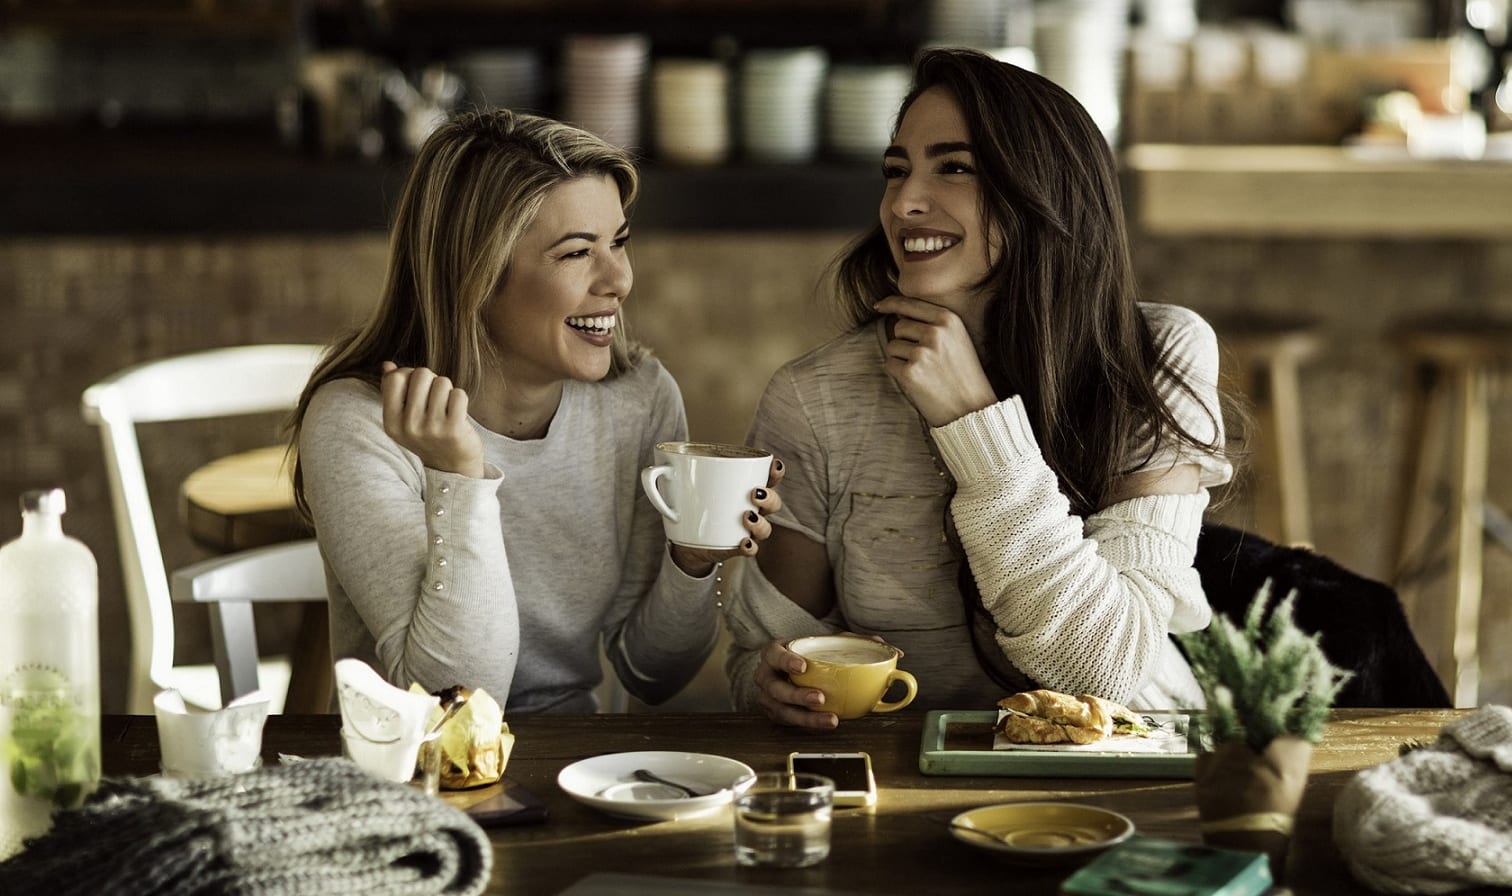 Coffee Shop with Two Smiling Women